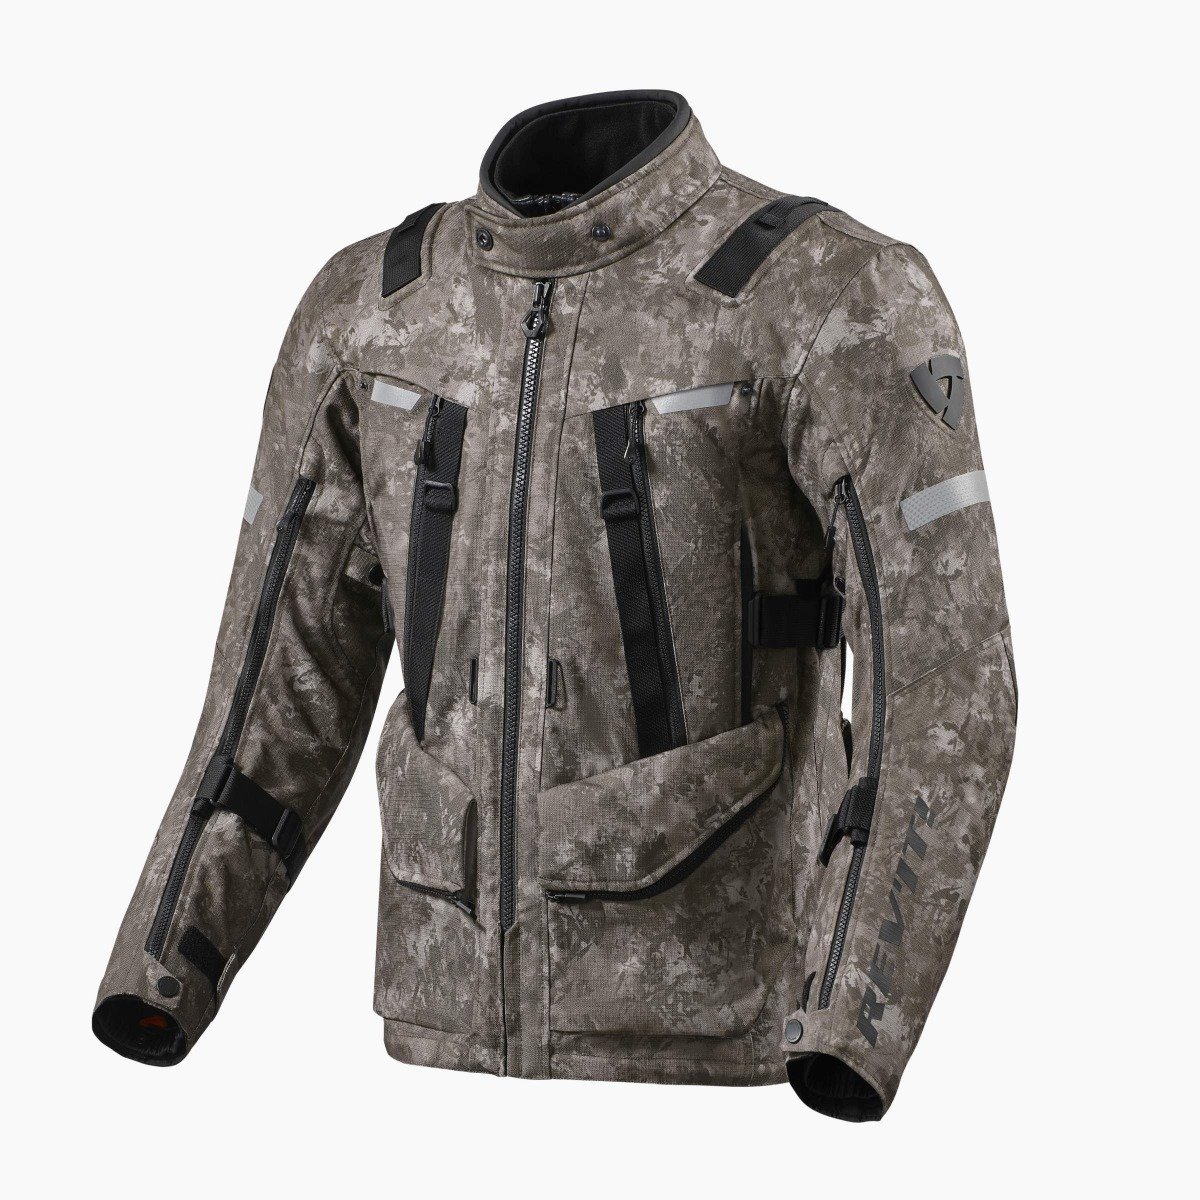 Image of REV'IT! Sand 4 H2O Jacket Camo Brown Size M ID 8700001311380